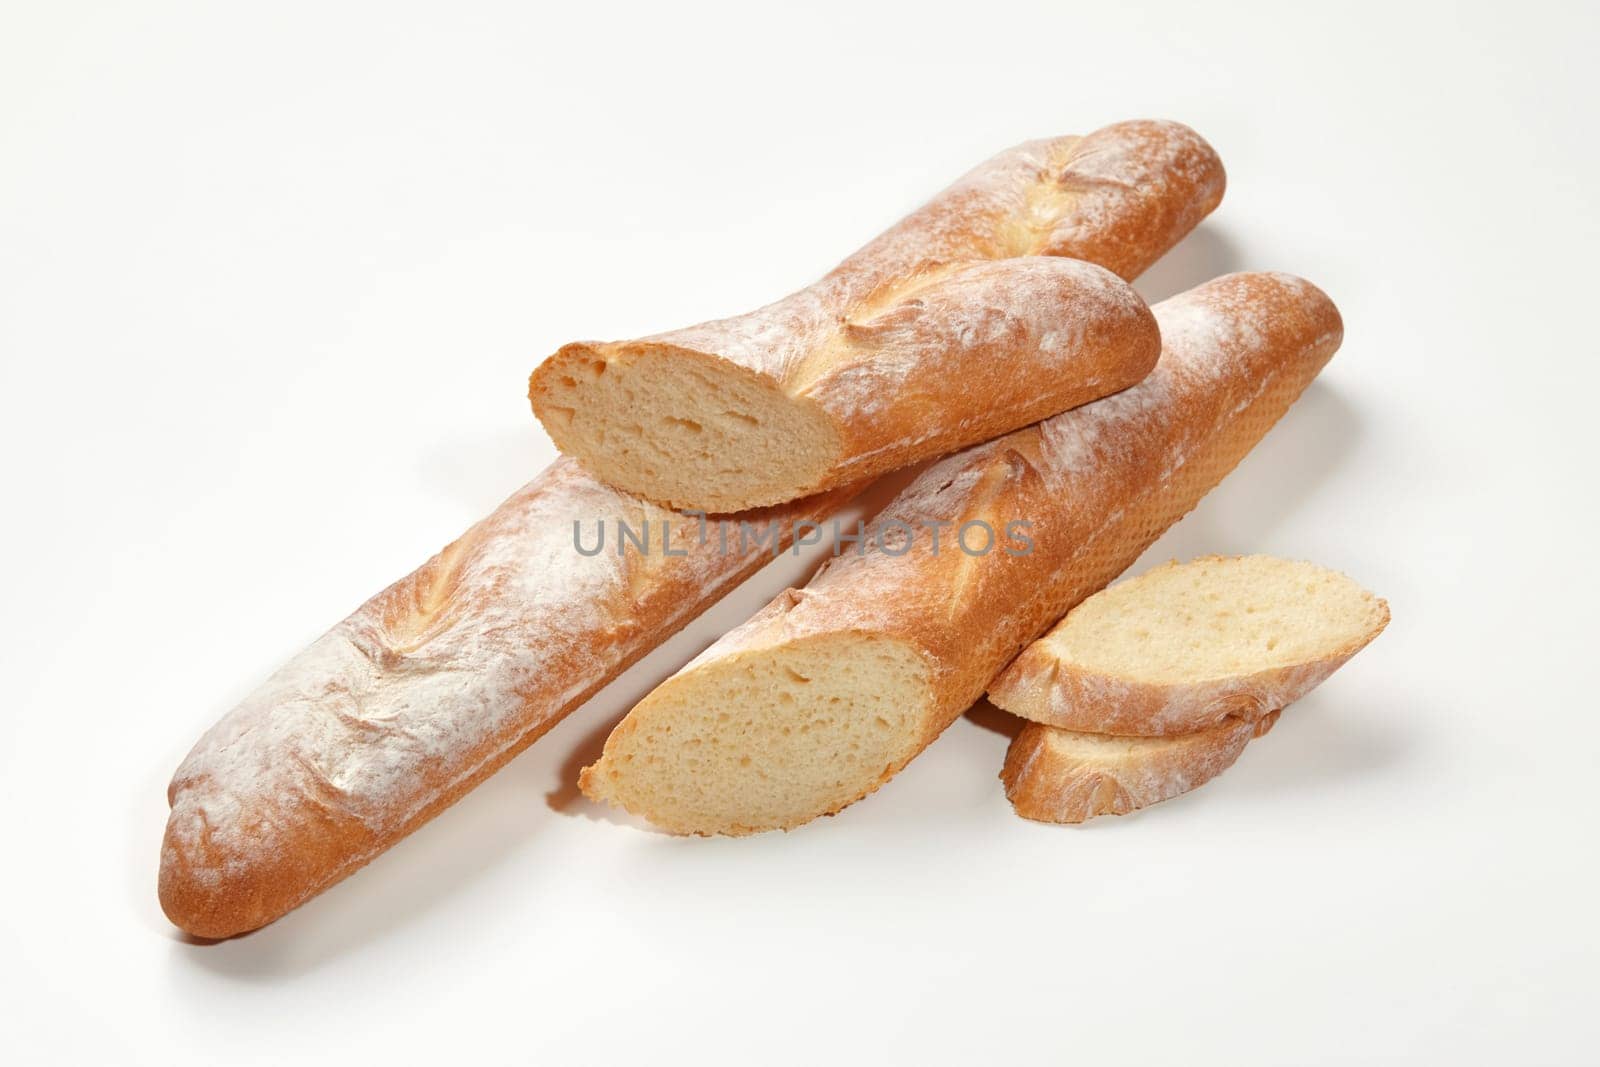 Closeup of freshly baked whole and sliced wheat baguettes isolated on white background. Main staple. Artisanal breadmaking concept by nazarovsergey